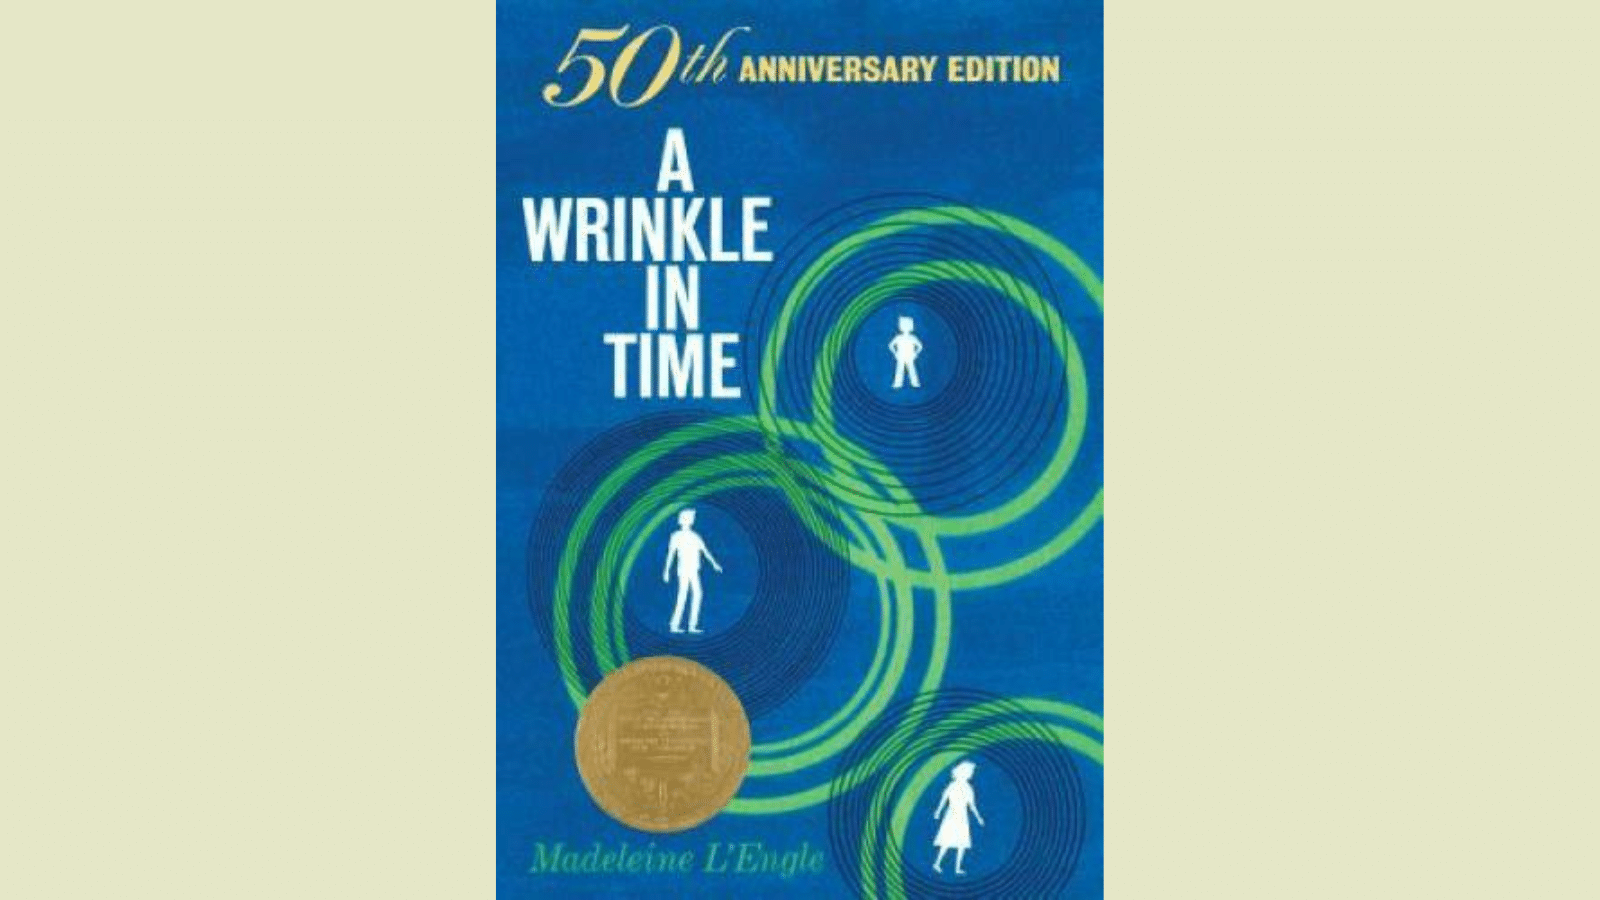 Wrinkle in Time.